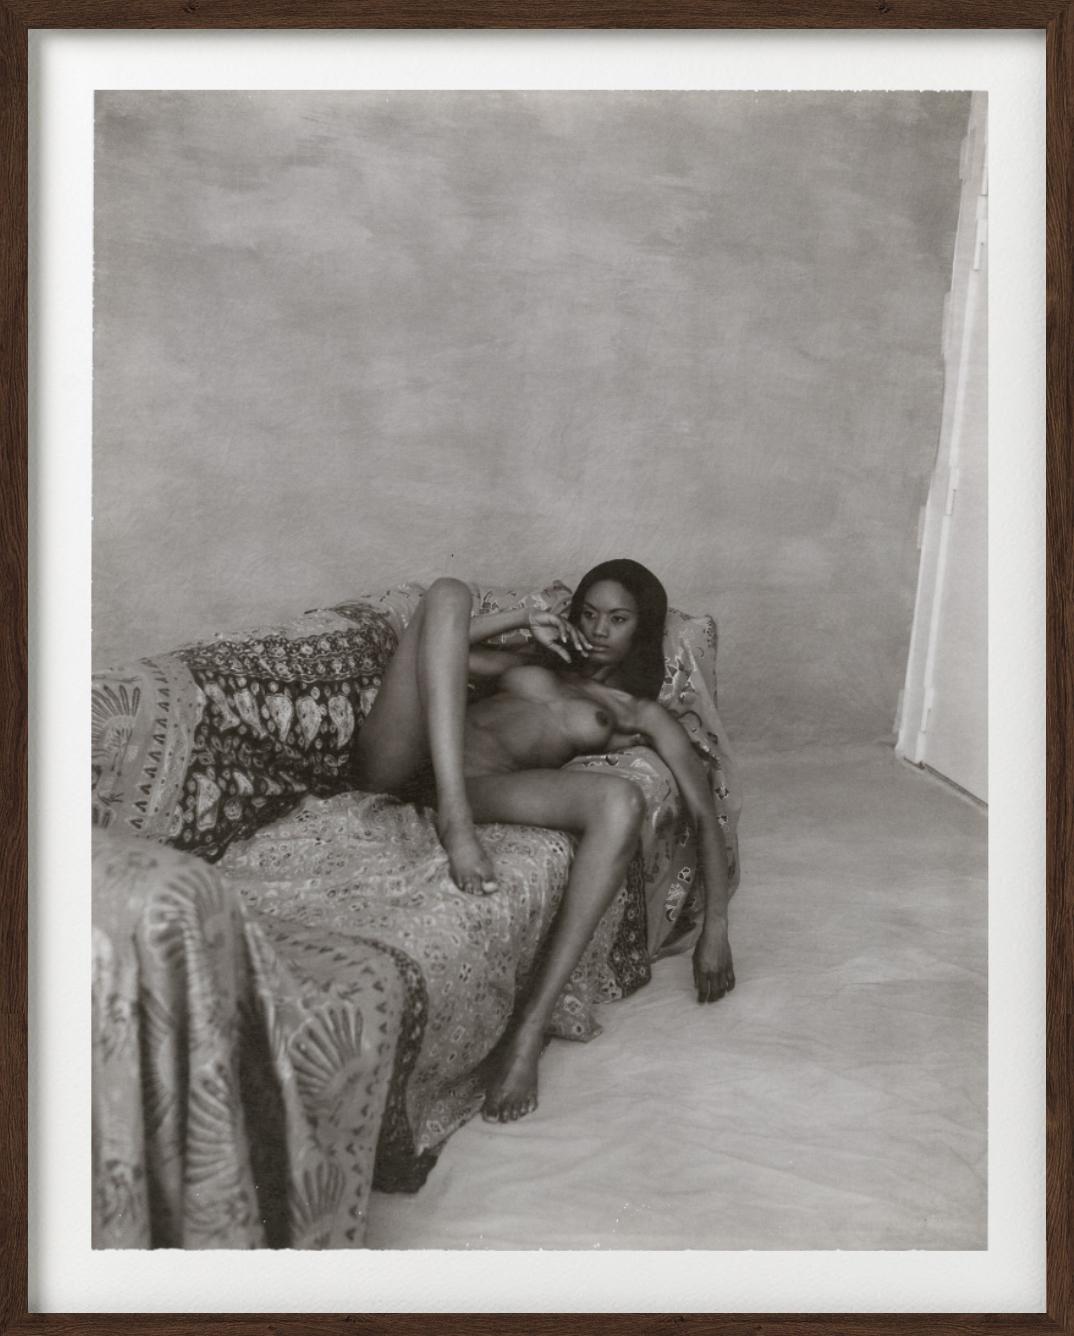 'Margareth, Paris' - nude on a sofa, fine art photography, 1994 - Photograph by Bruno Bisang